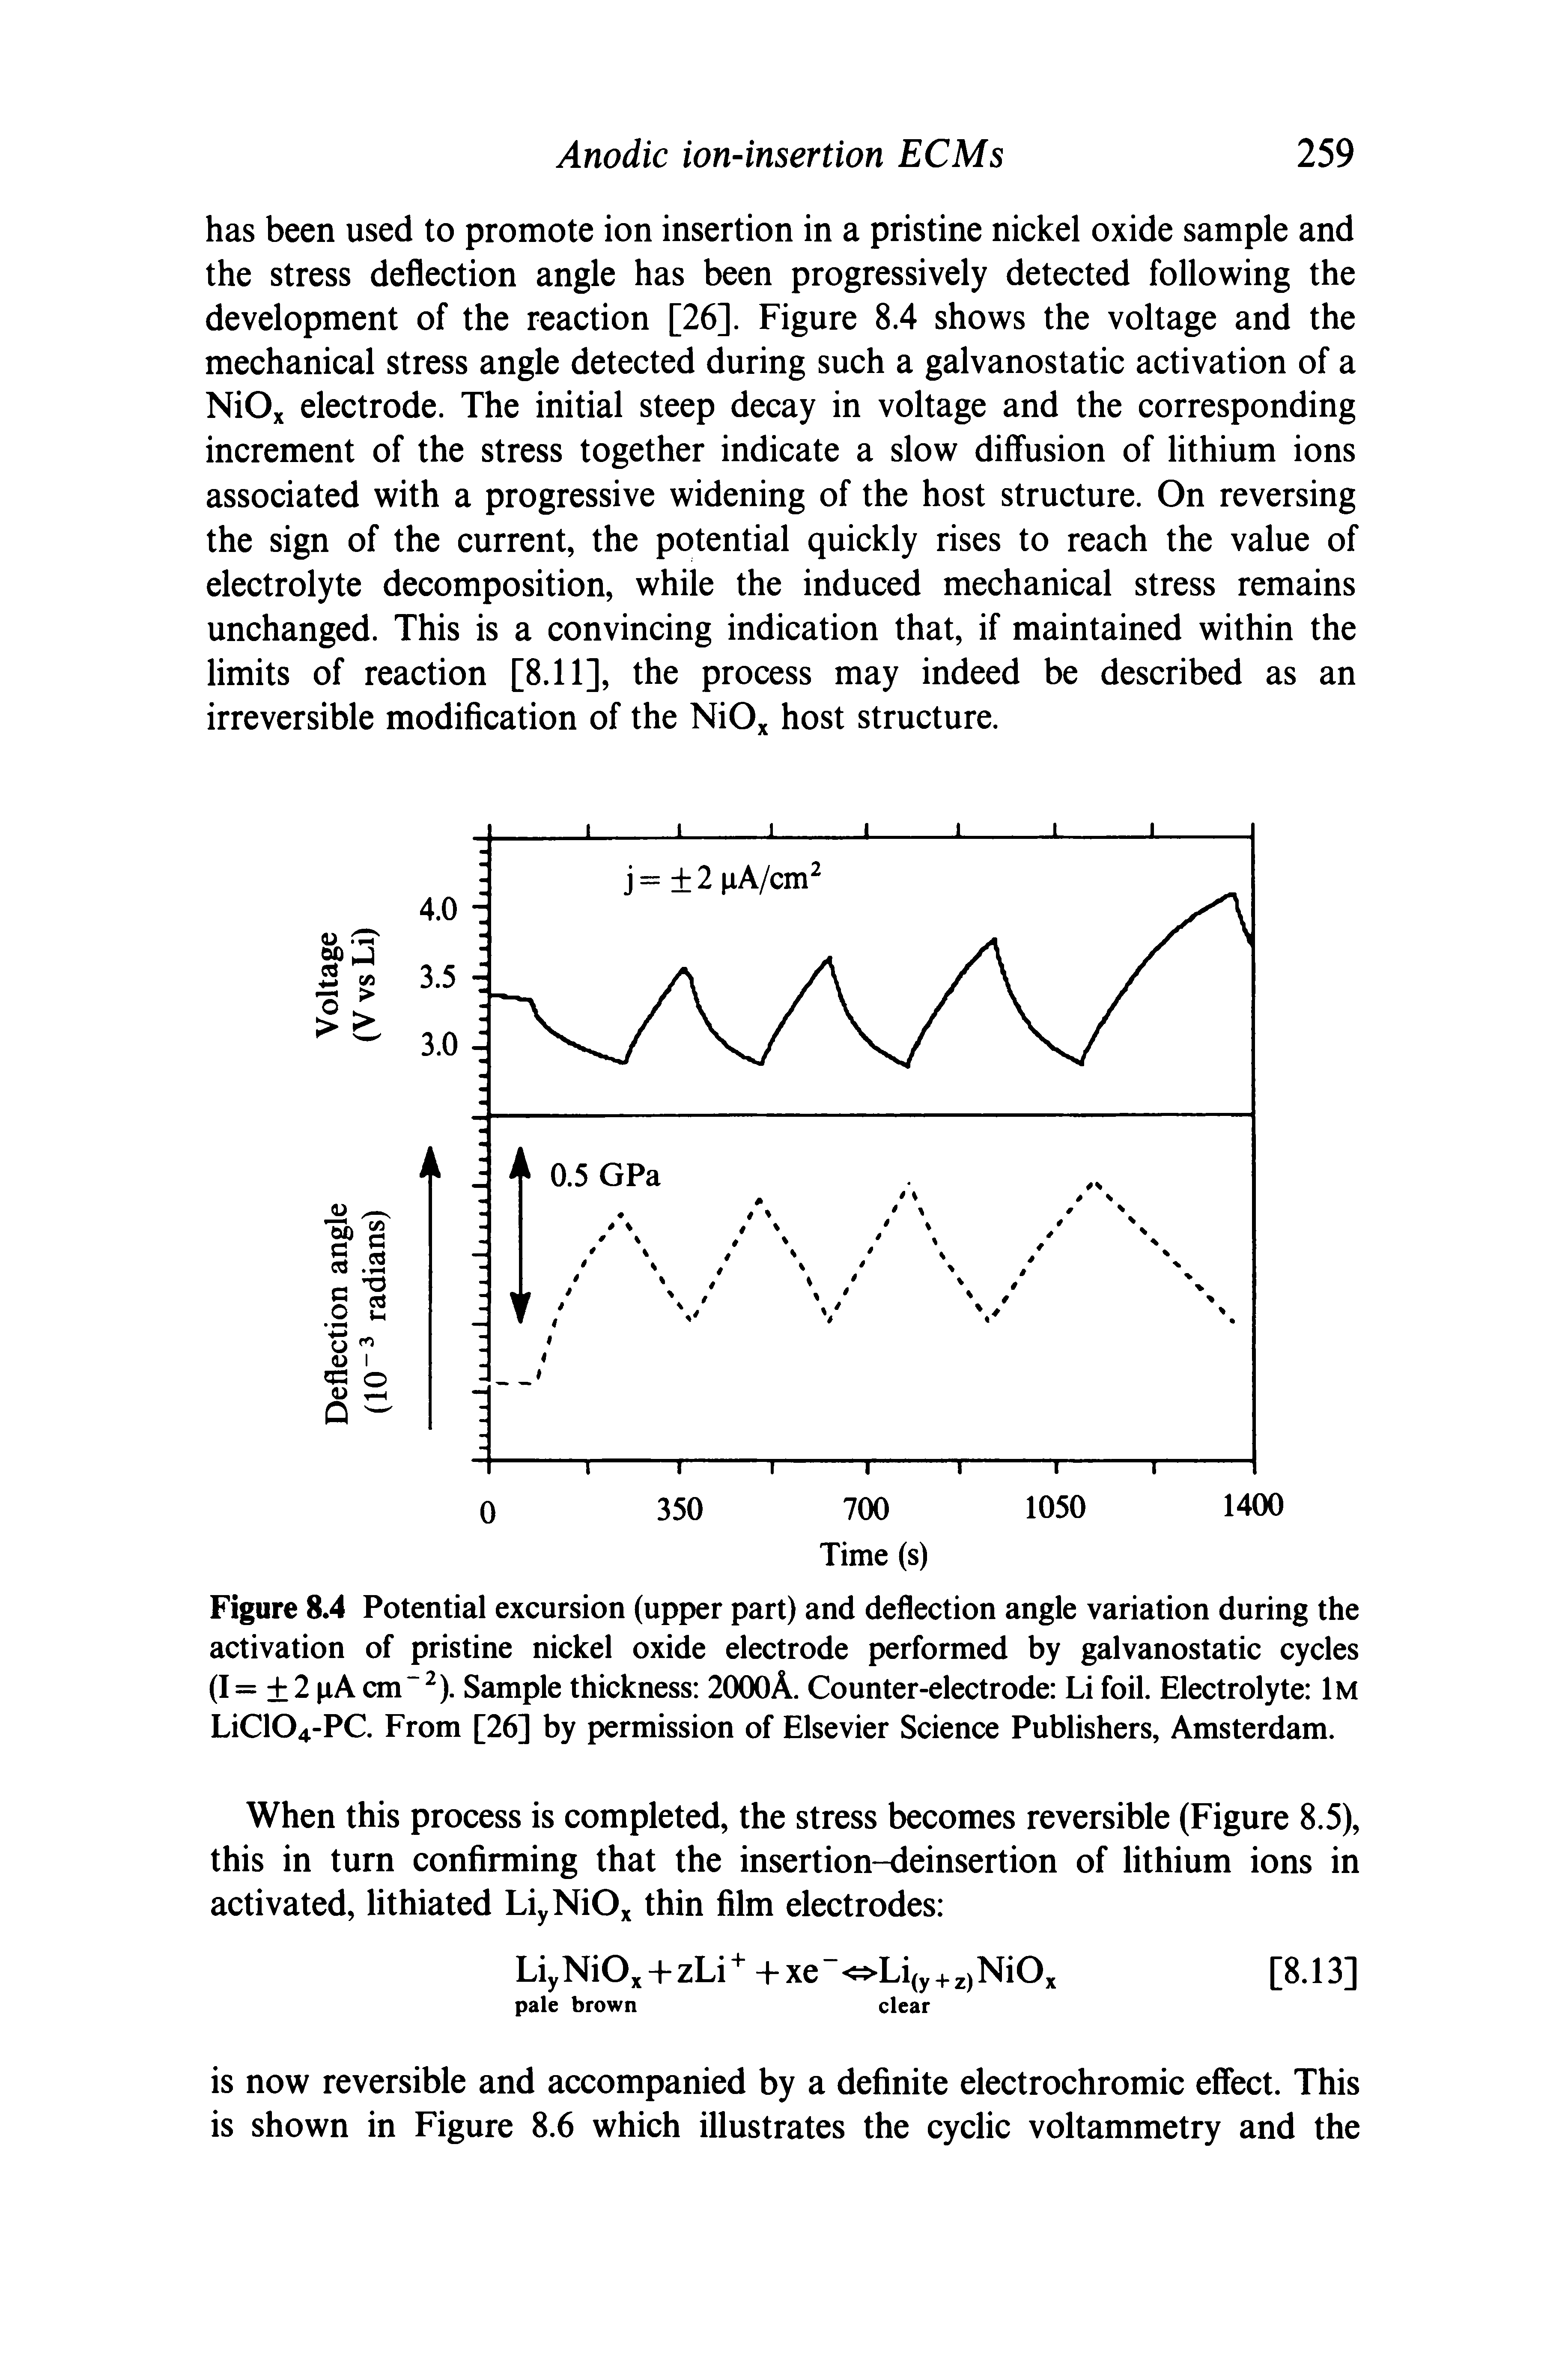 Figure 8.4 Potential excursion (upper part) and deflection angle variation during the activation of pristine nickel oxide electrode performed by galvanostatic cycles (1= 2 xA cm ). Sample thickness 2000A. Counter-electrode Li foil. Electrolyte iM LiClO -PC. From [26] by permission of Elsevier Science Publishers, Amsterdam.